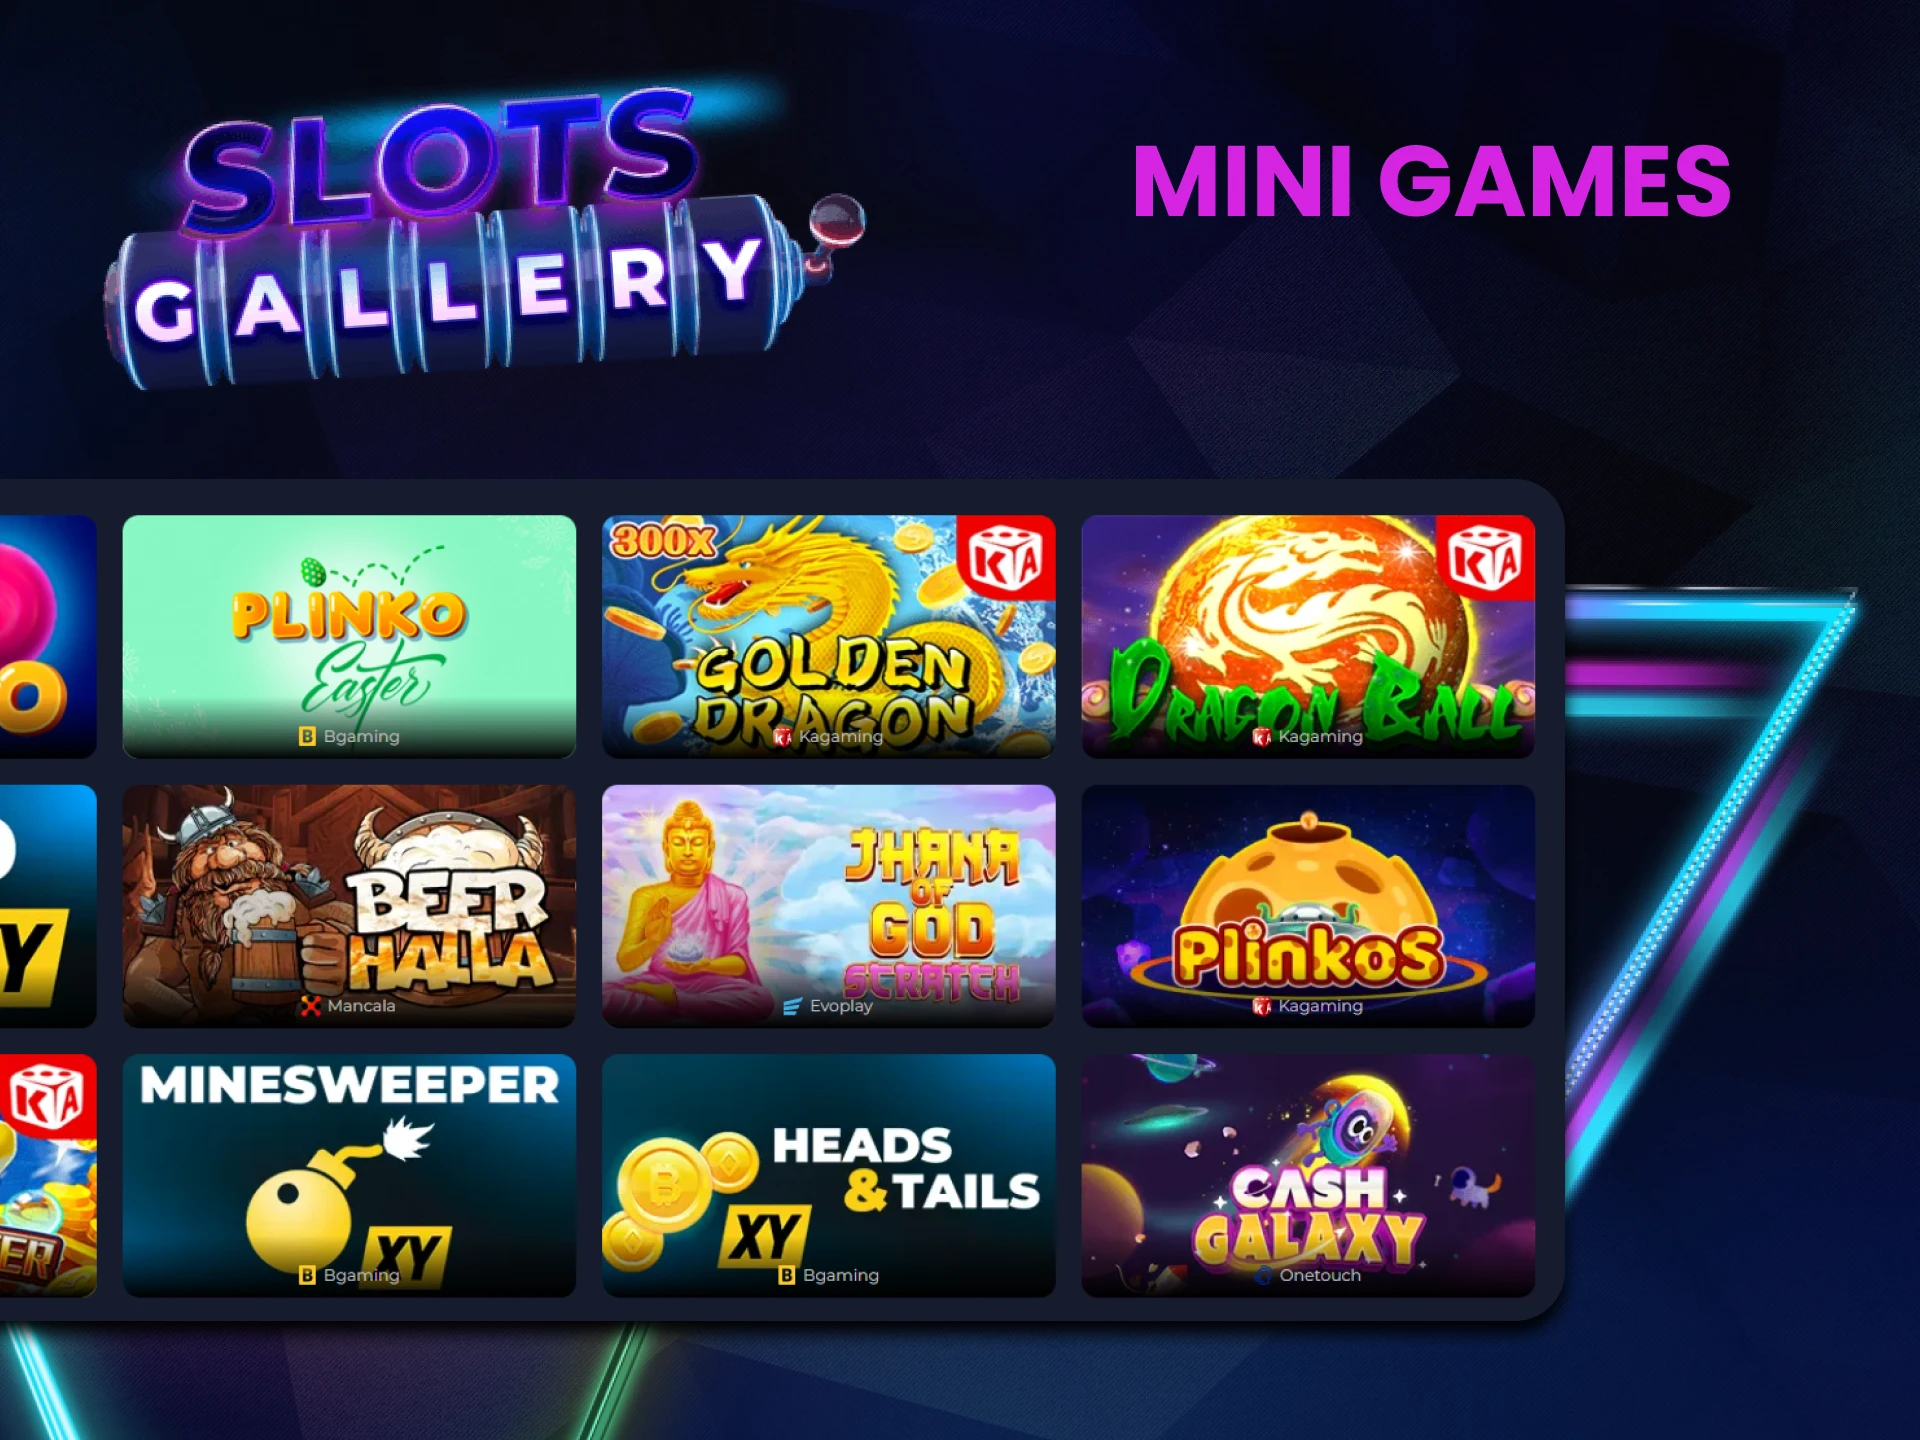 For casino games from SlotsGallery, choose the Mini Game section.